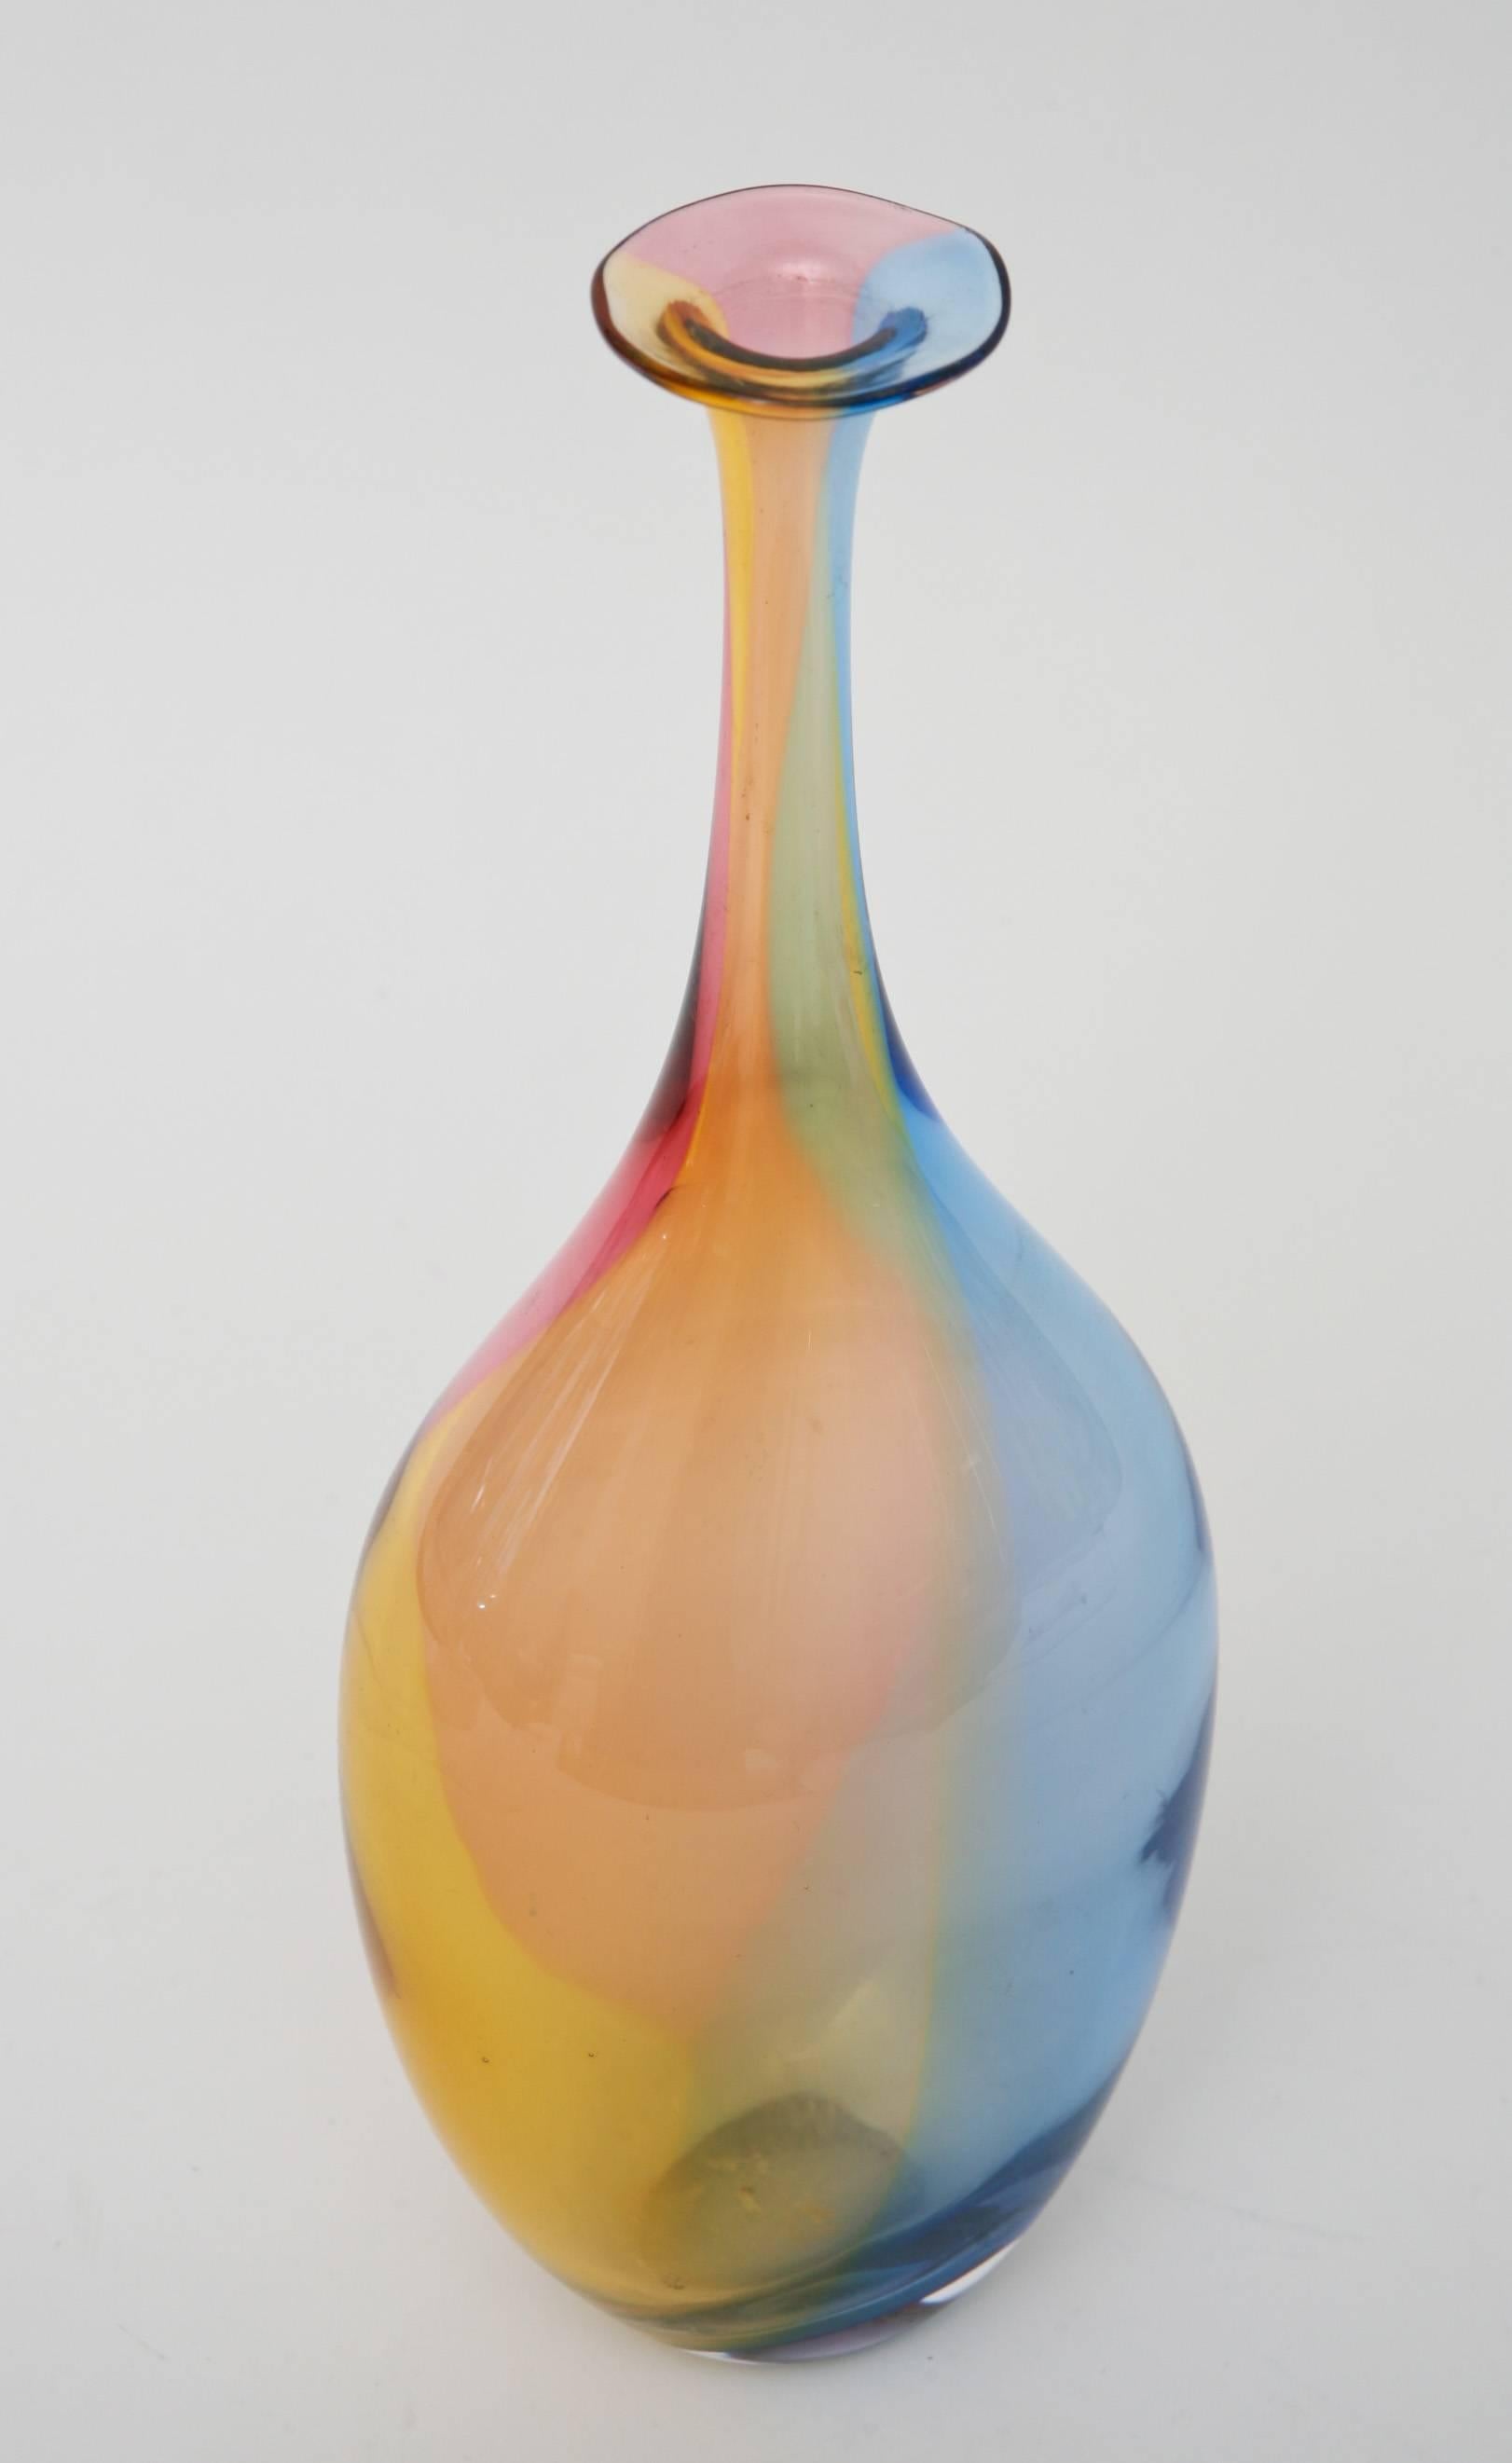 This beautiful Swedish glass object vase or vessel is signed and numbered K.Engman 488-38 Kosta Boda. It is delicate in weight and delicate in beautiful shape and color. It has an ethereal look and feel almost like a wisp of gorgeous subdued rainbow